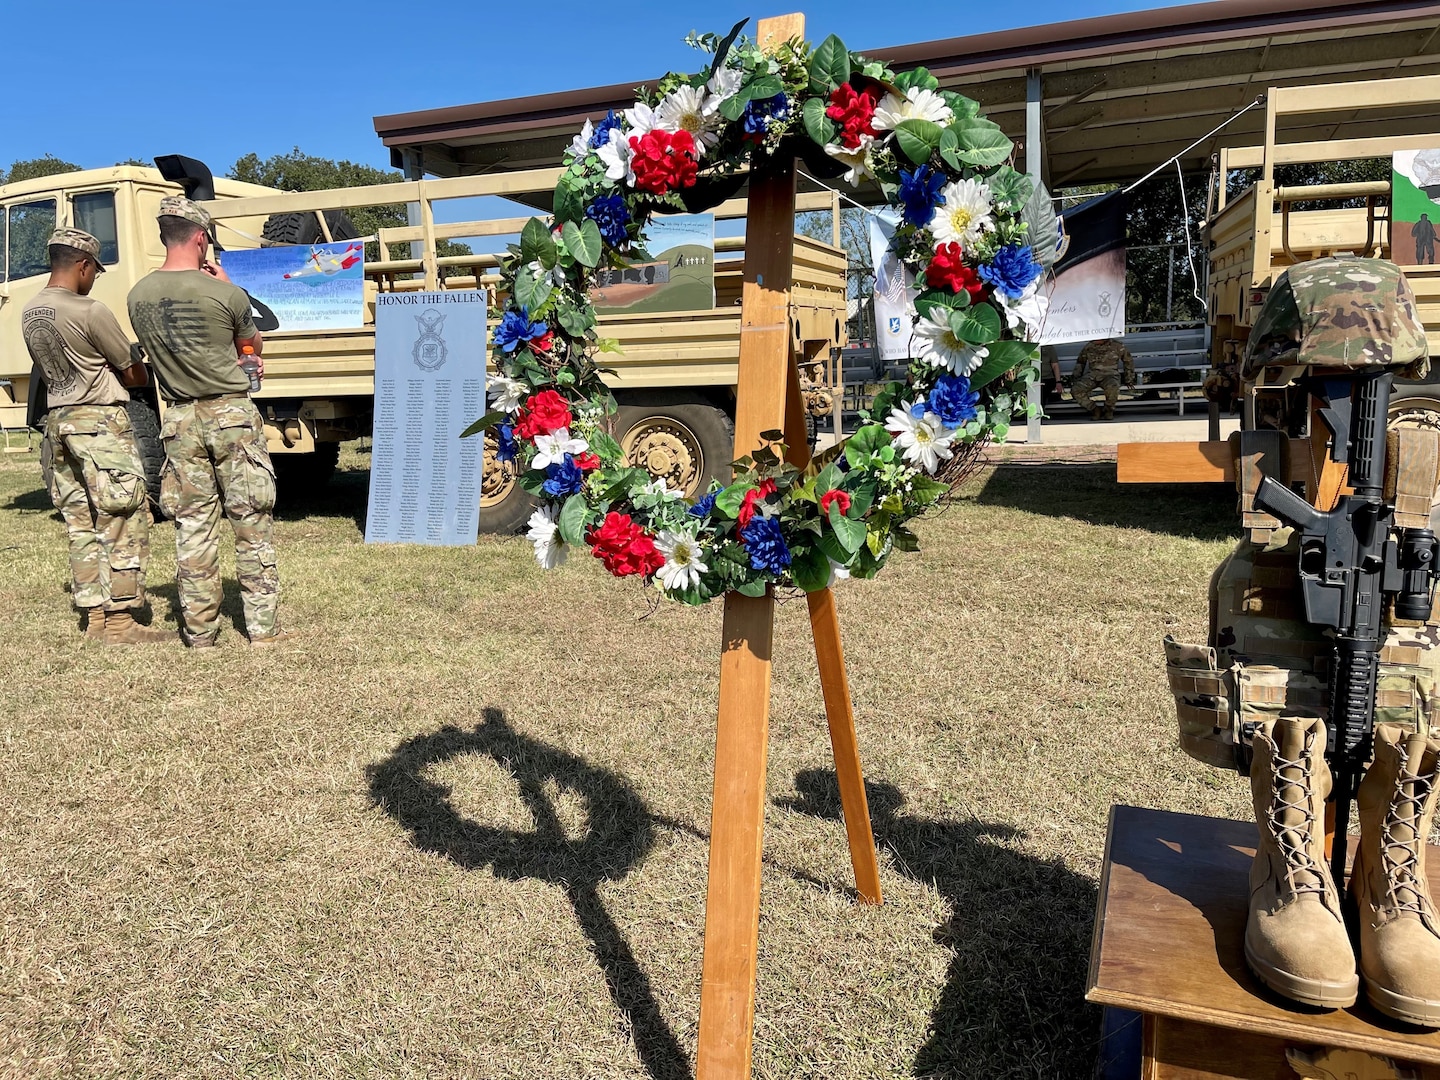 Wreath on display at 14th annual defender ruck